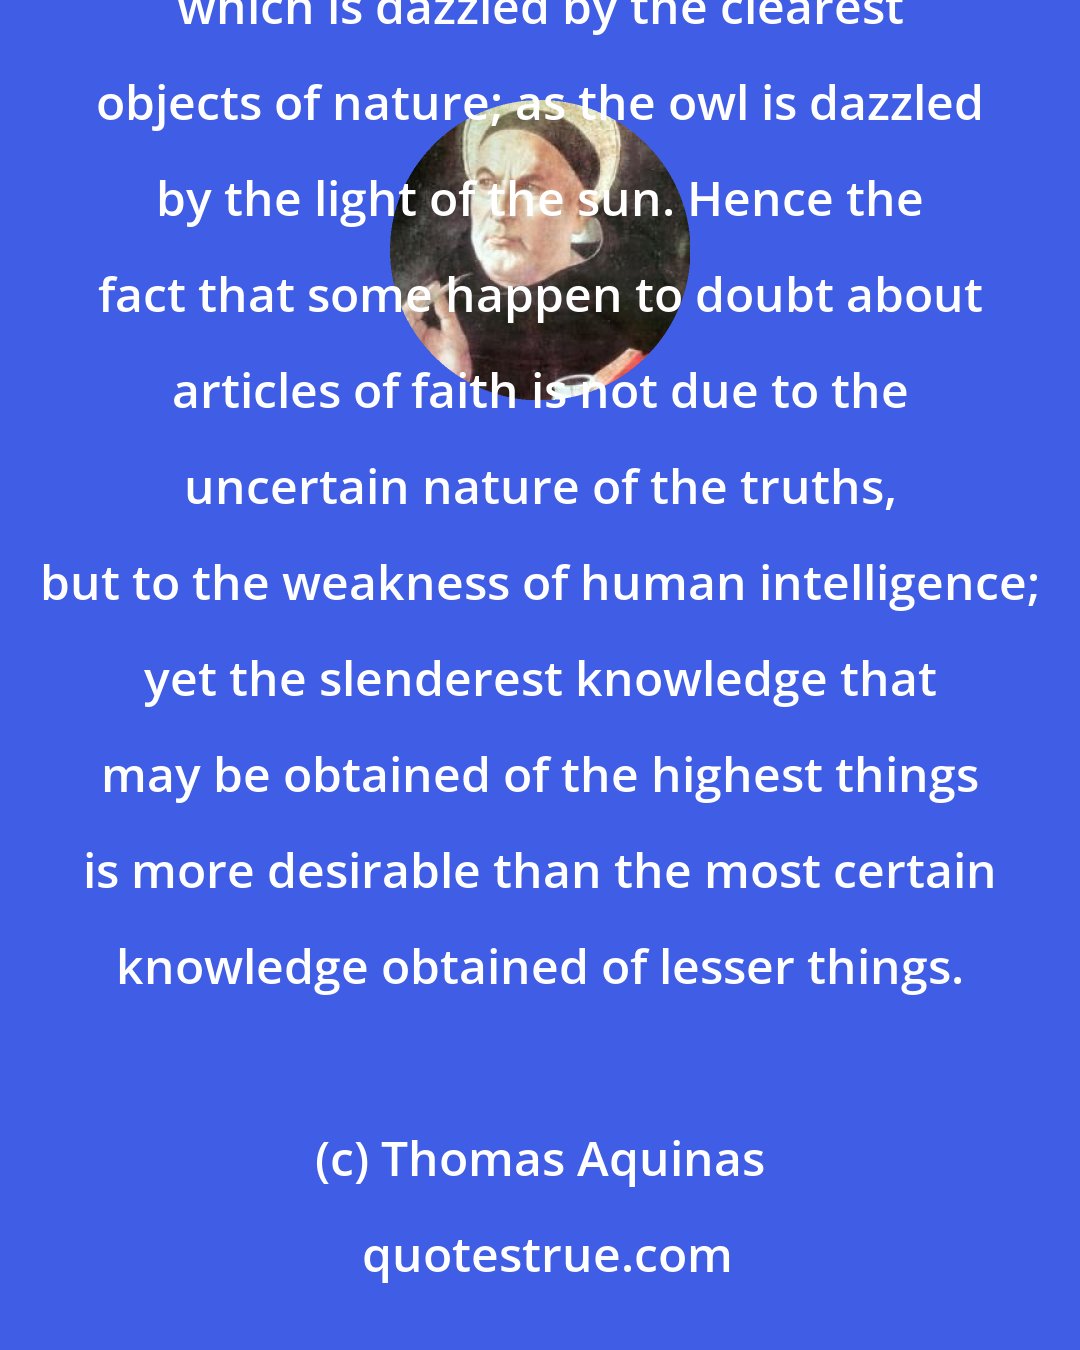 Thomas Aquinas: It may well happen that what is in itself the more certain on account of the weakness of our intelligence, which is dazzled by the clearest objects of nature; as the owl is dazzled by the light of the sun. Hence the fact that some happen to doubt about articles of faith is not due to the uncertain nature of the truths, but to the weakness of human intelligence; yet the slenderest knowledge that may be obtained of the highest things is more desirable than the most certain knowledge obtained of lesser things.